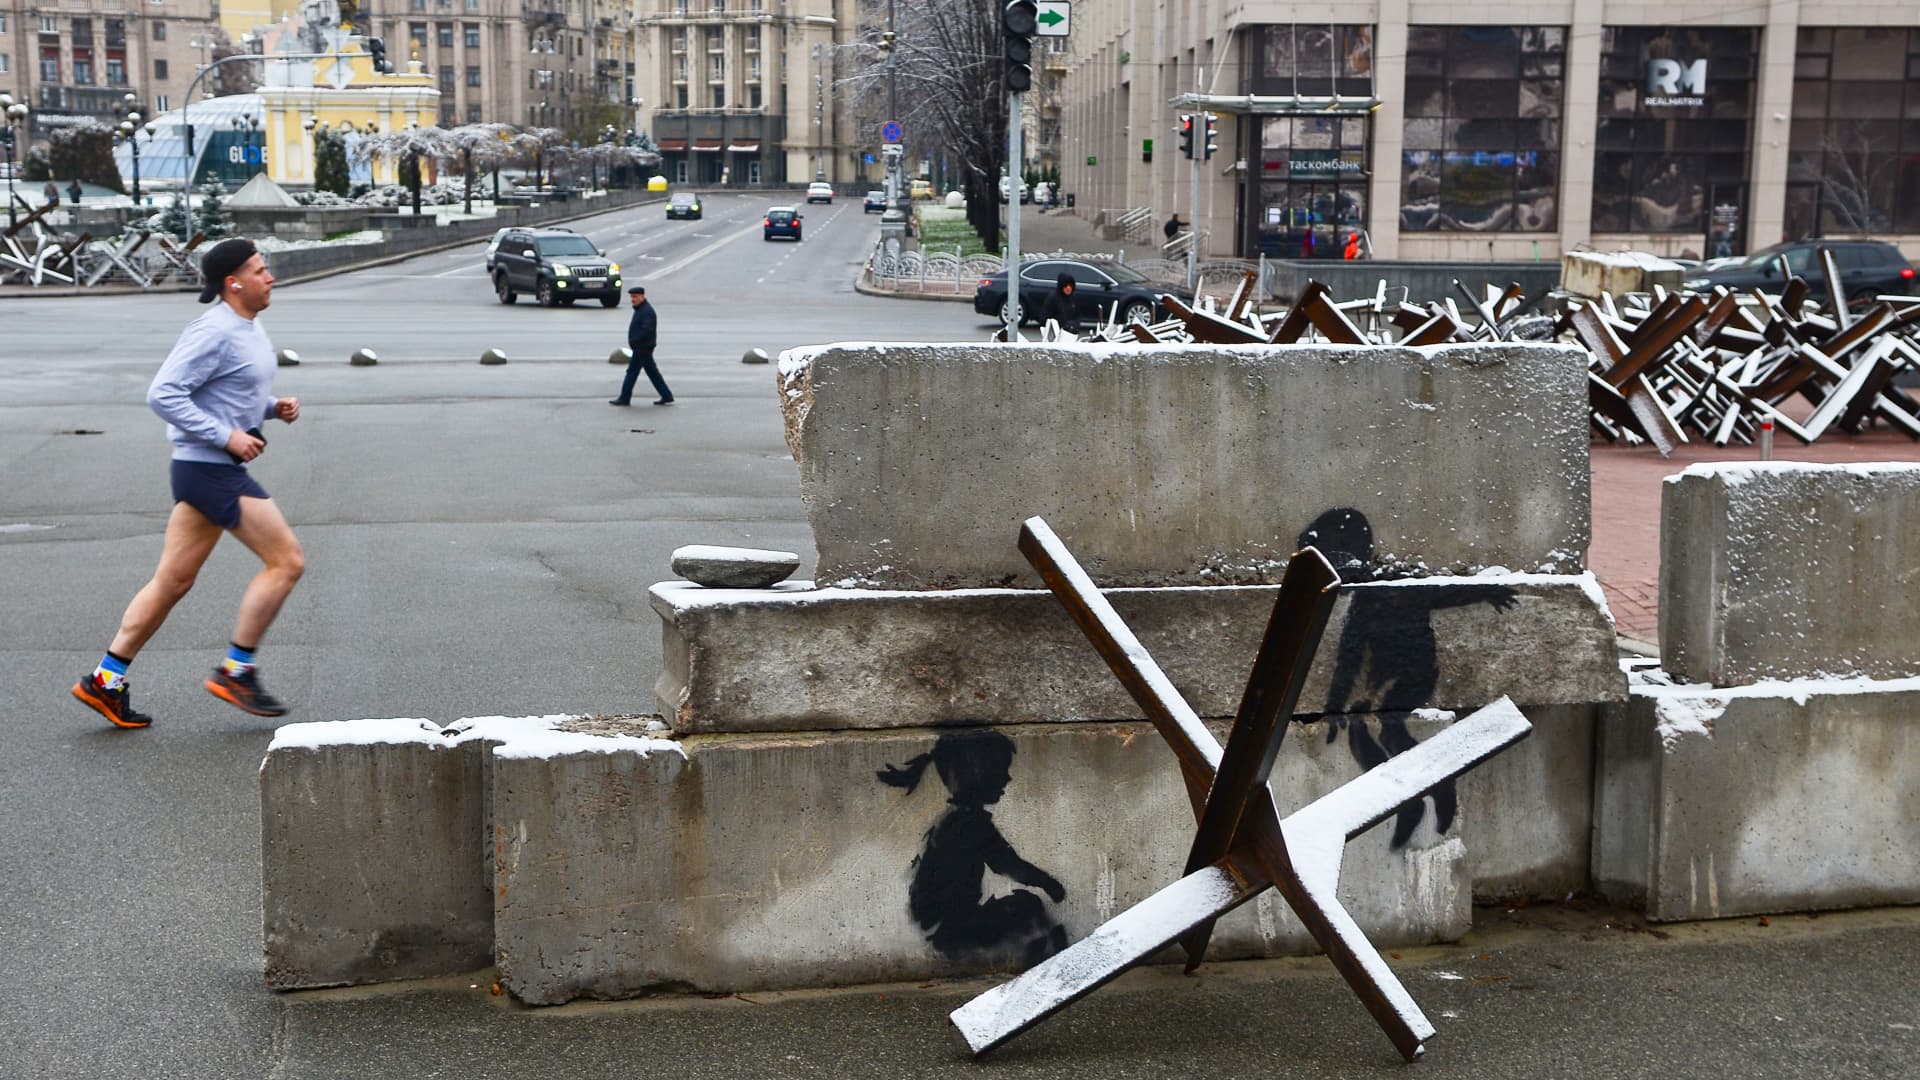 England-based street artist Banksy has transformed an anti-tank obstacle (Czech hedgehog) in Maidan Nezalezhnosti into a seesaw for a boy and a girl in his mural, Kyiv, capital of Ukraine. 